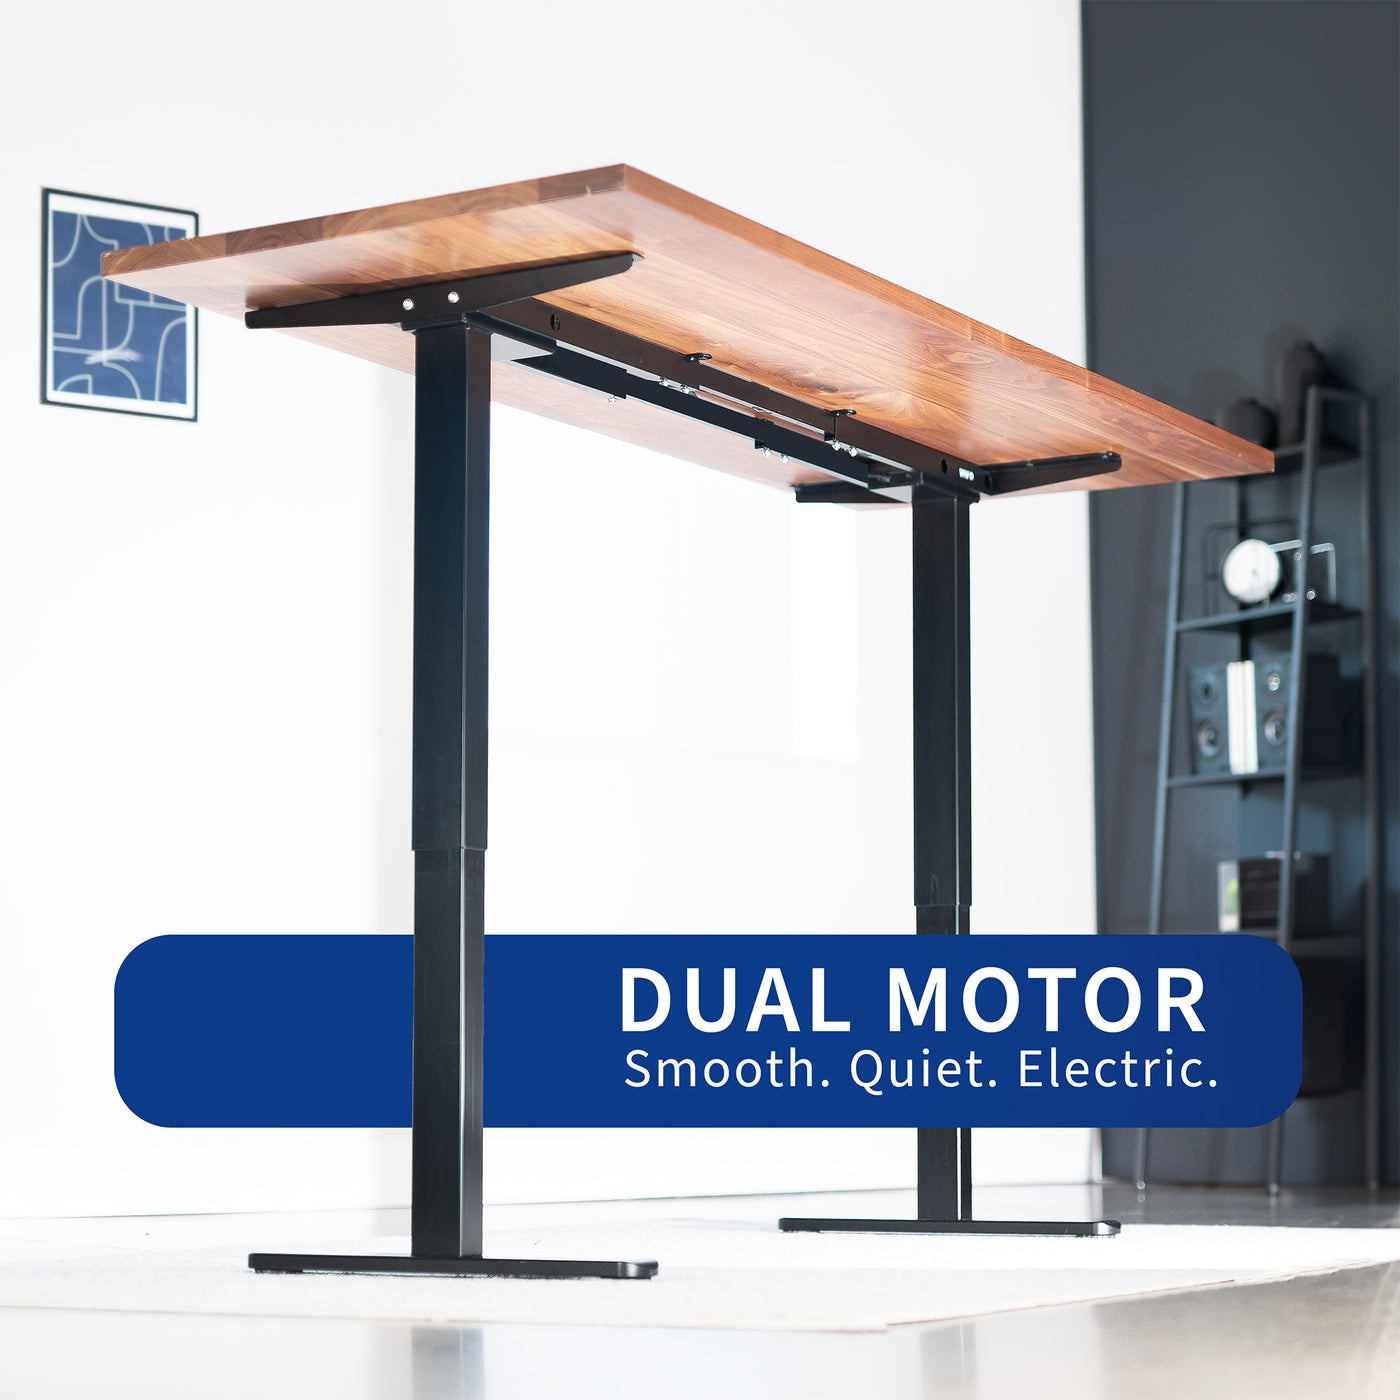 Motorized standing desk frame for raising your table top to a sitting or standing position.